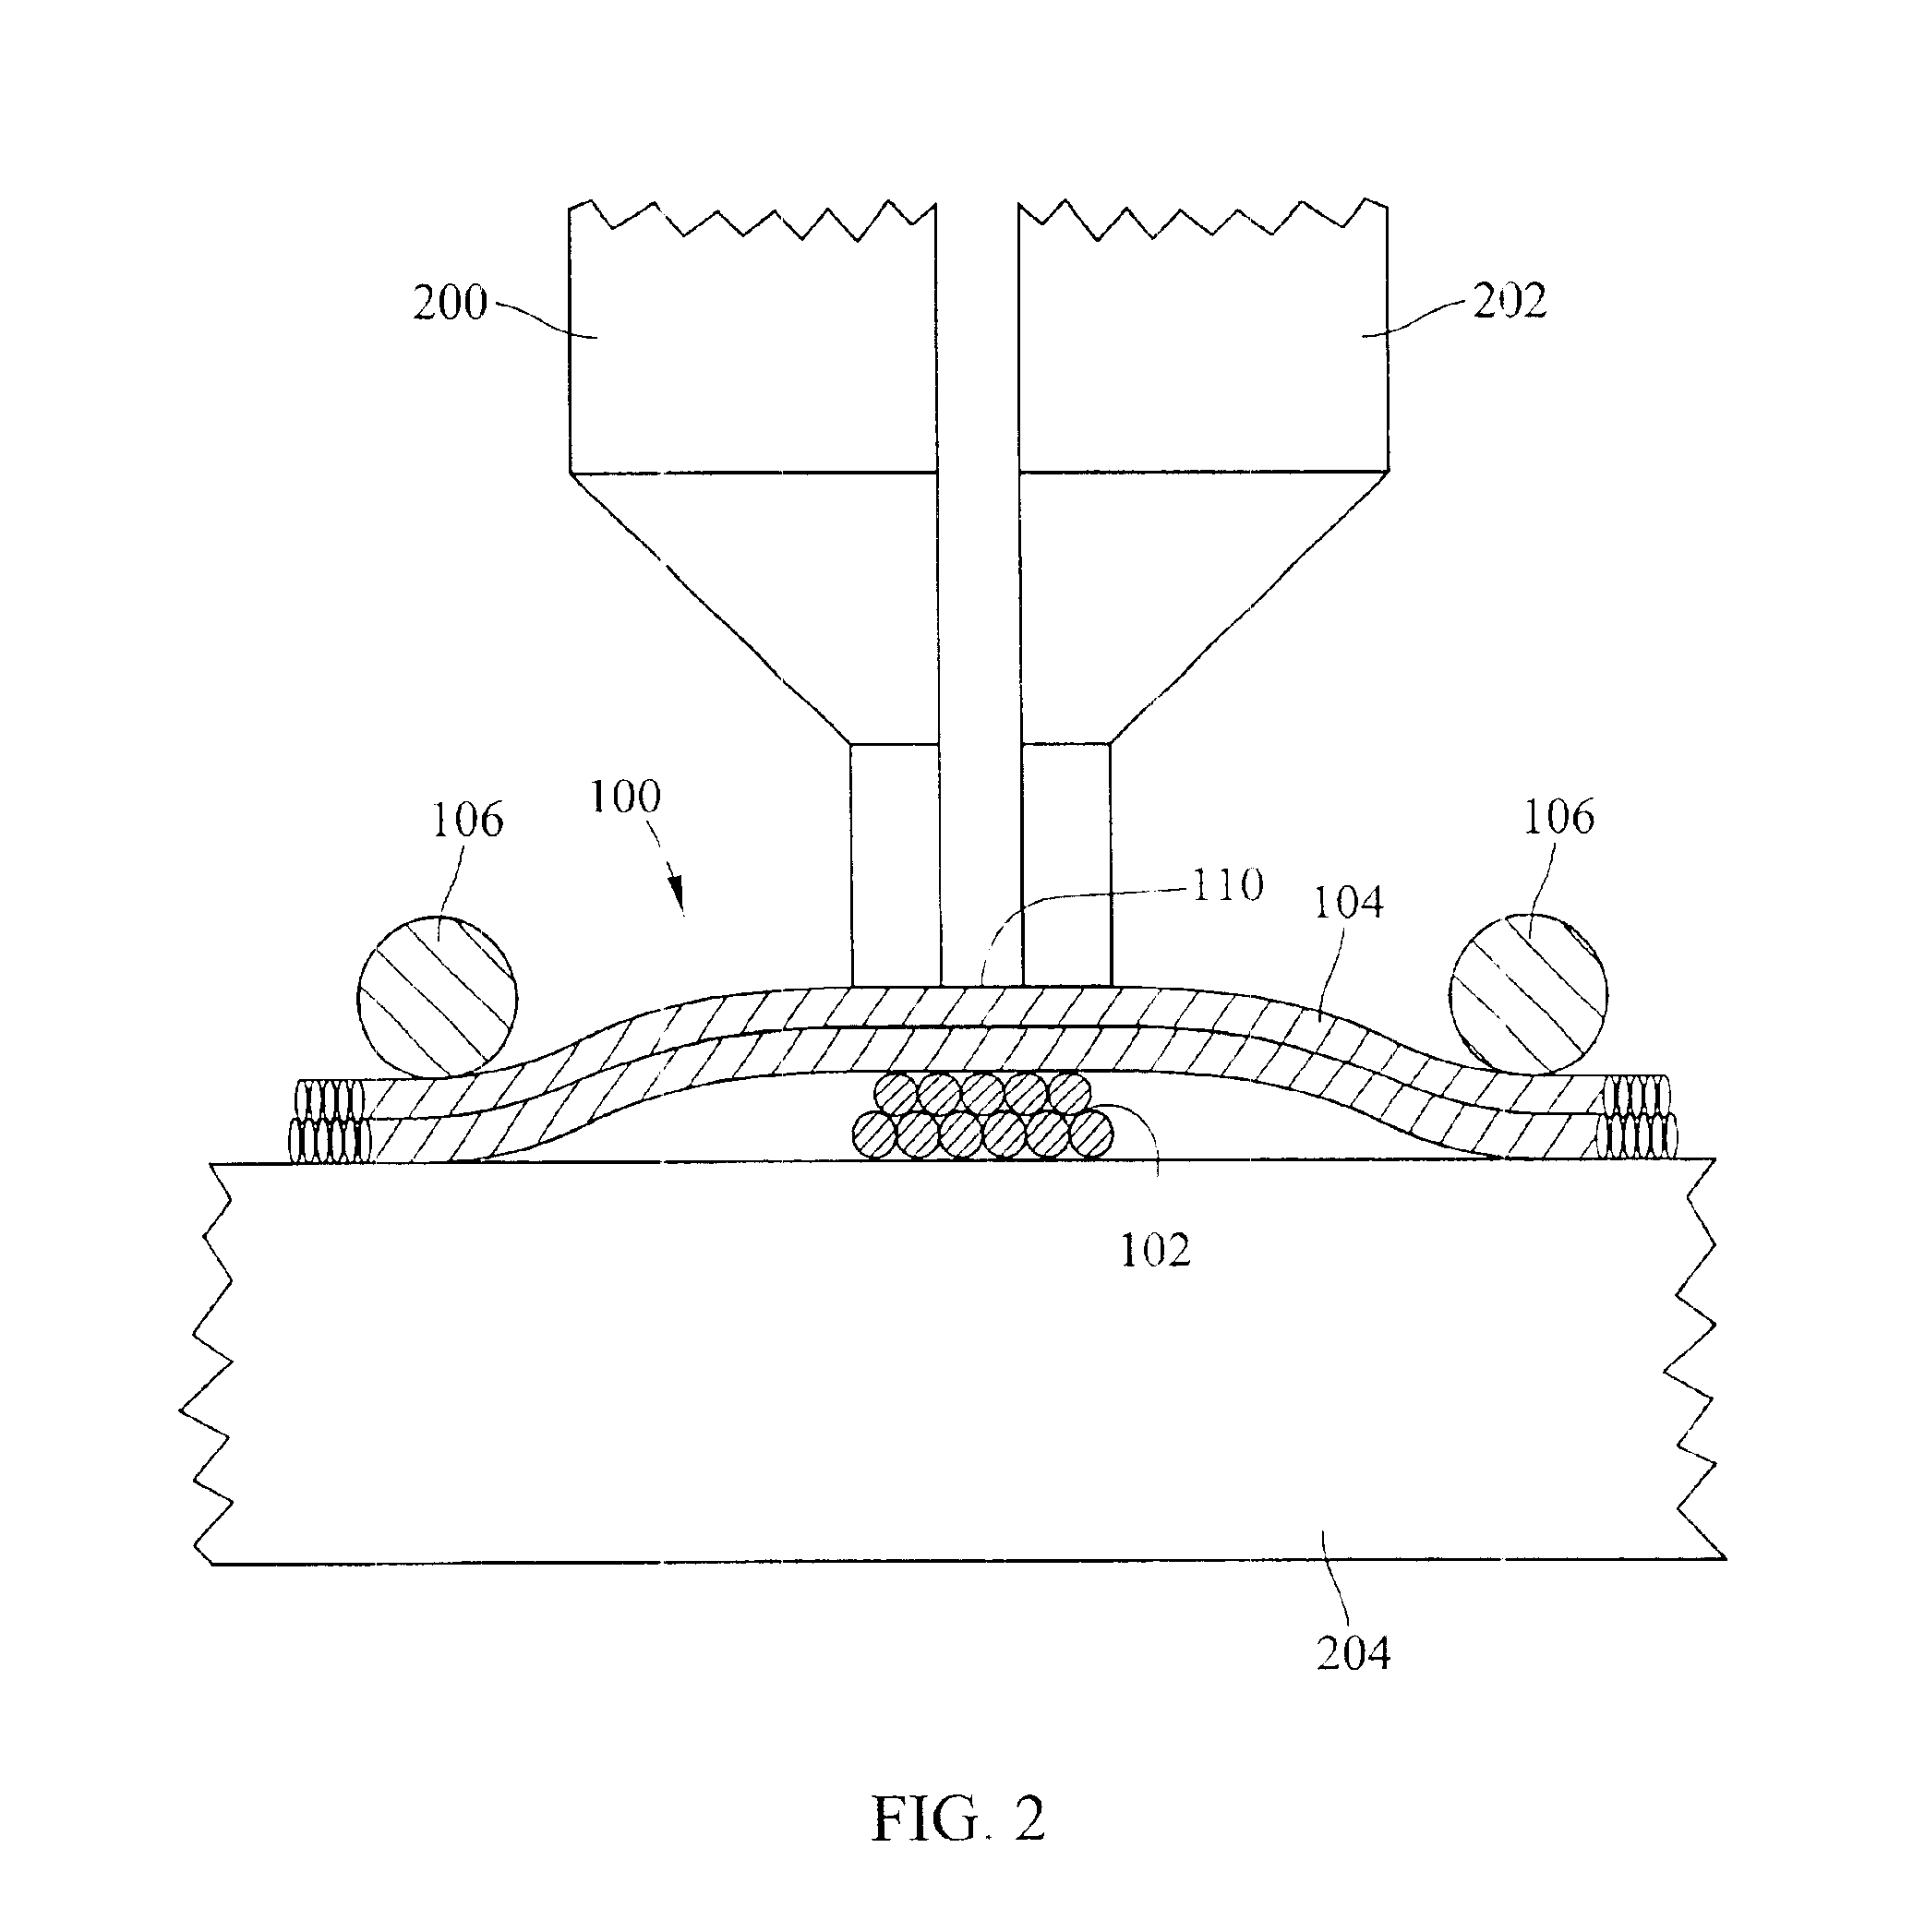 Methods and systems for selectively connecting and disconnecting conductors in a fabric